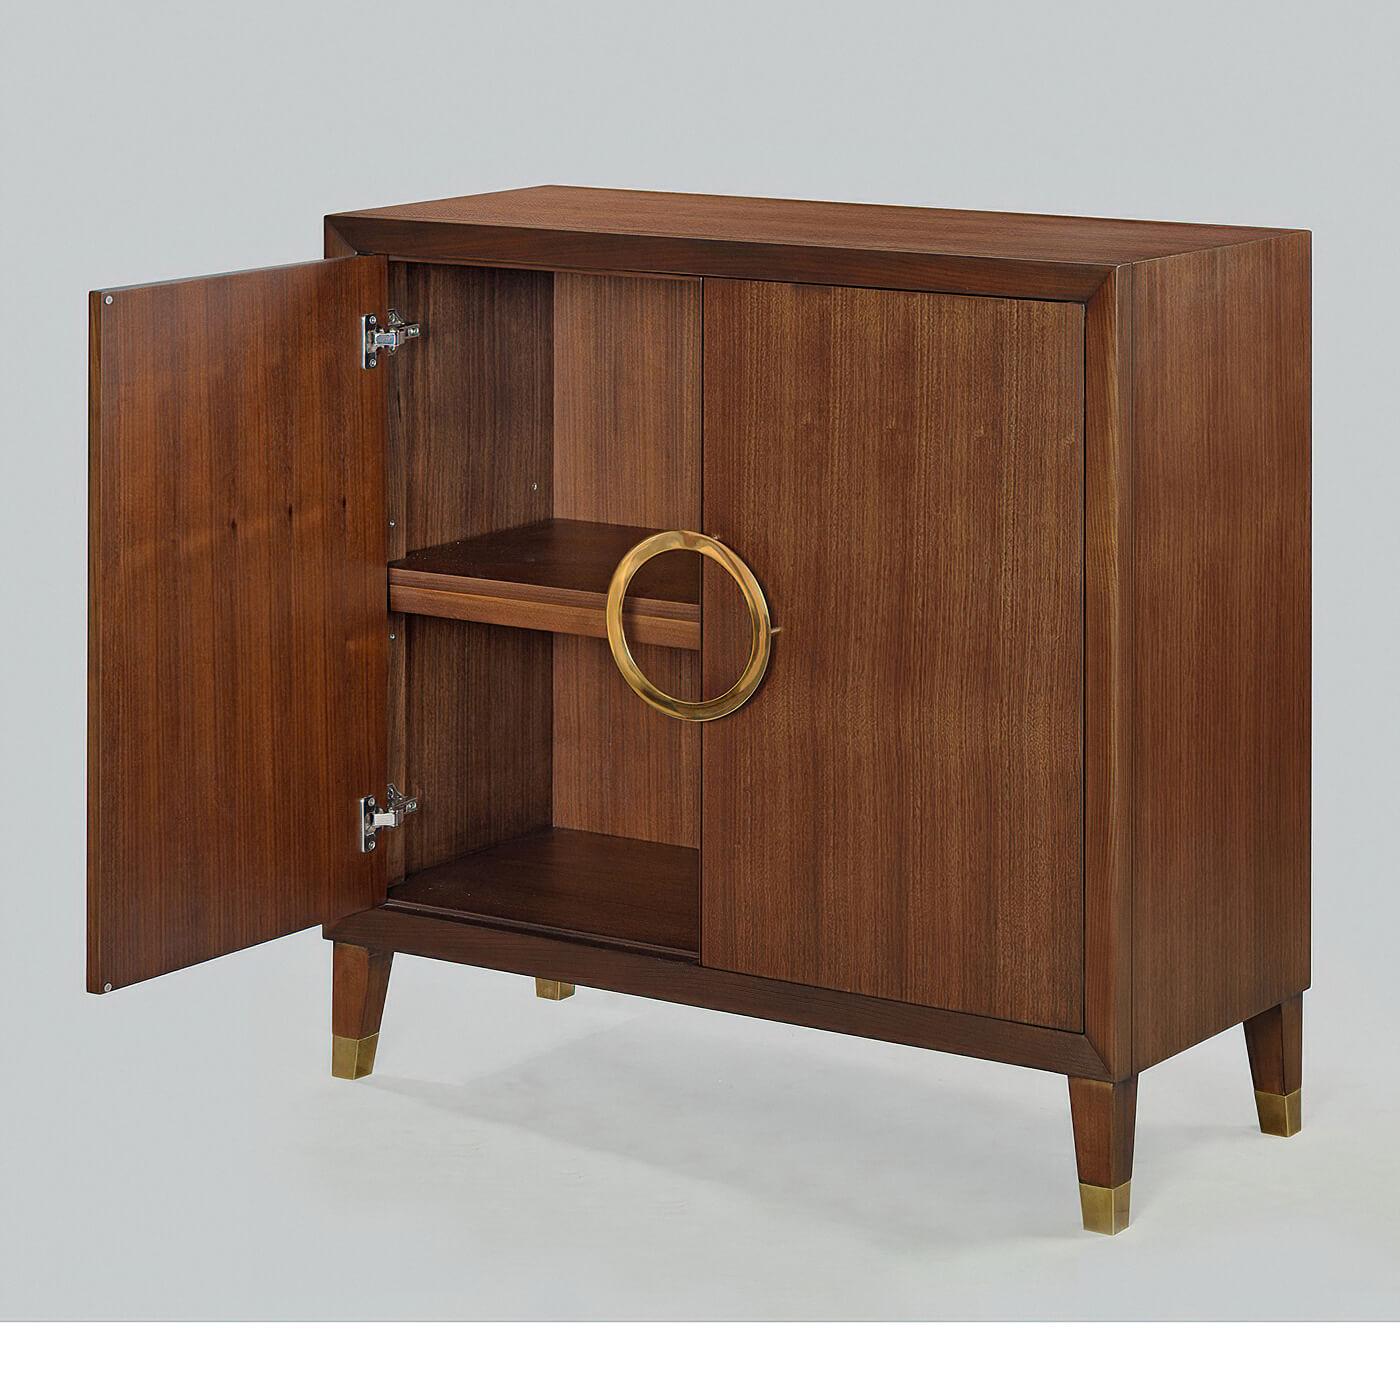 A Mid-Century Modern style walnut two-door cabinet with a beveled frame, a custom hand cast polished brass ring handle, interior shelves, raised on square tapered legs with brass caps and finished in a warm truffle stain to highlight the beautiful